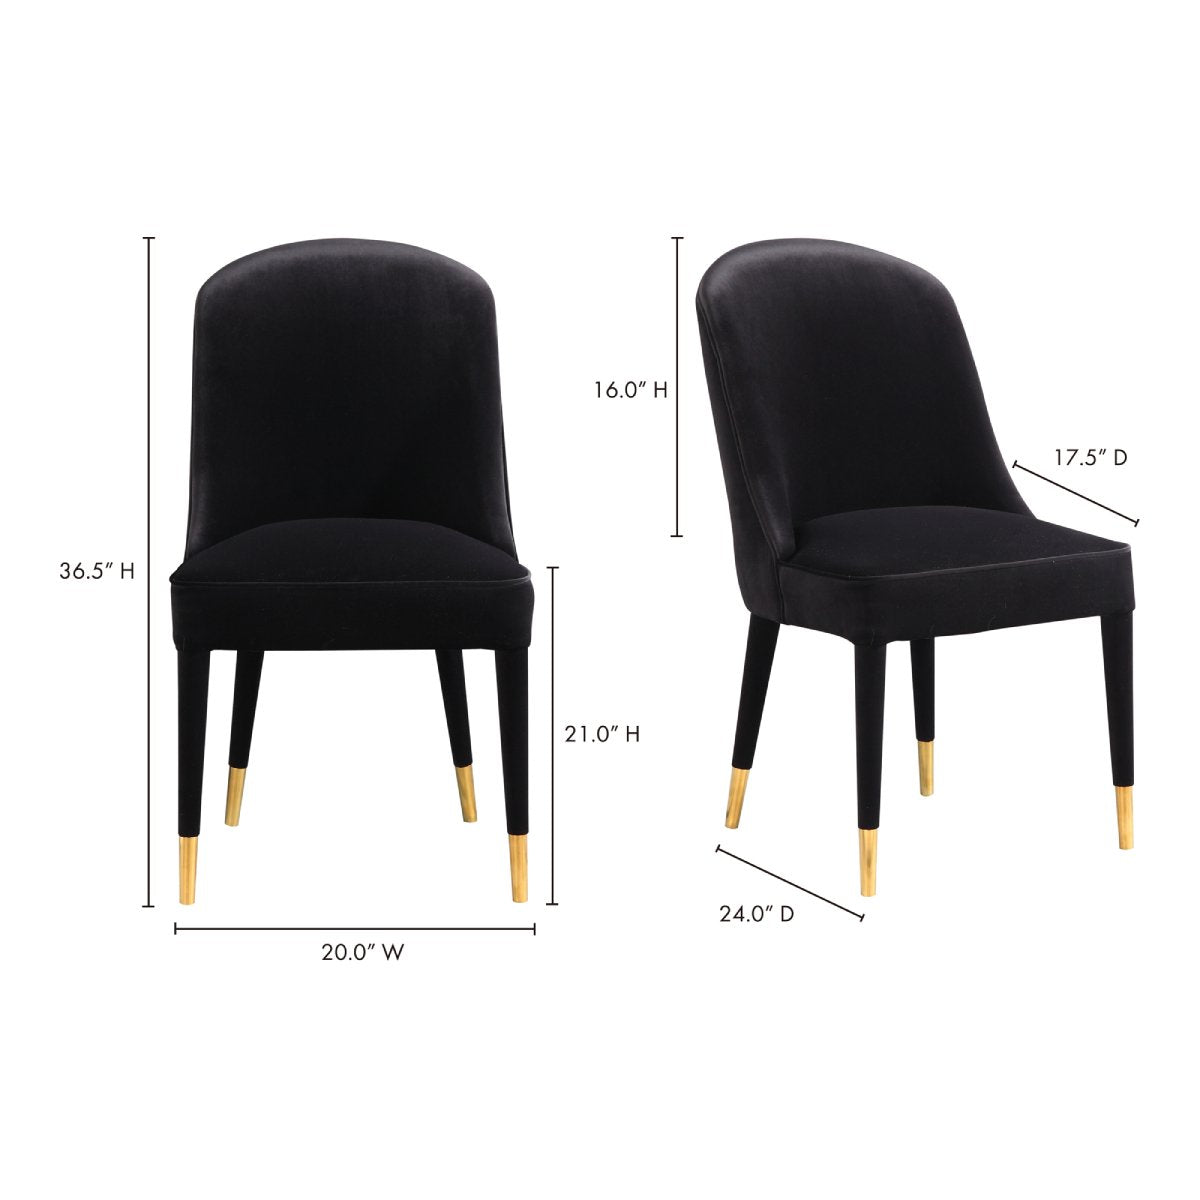 Load image into Gallery viewer, Liberty Dining Chair-M2 Dining Chairs Moe&amp;#39;s     Four Hands, Burke Decor, Mid Century Modern Furniture, Old Bones Furniture Company, Old Bones Co, Modern Mid Century, Designer Furniture, https://www.oldbonesco.com/
